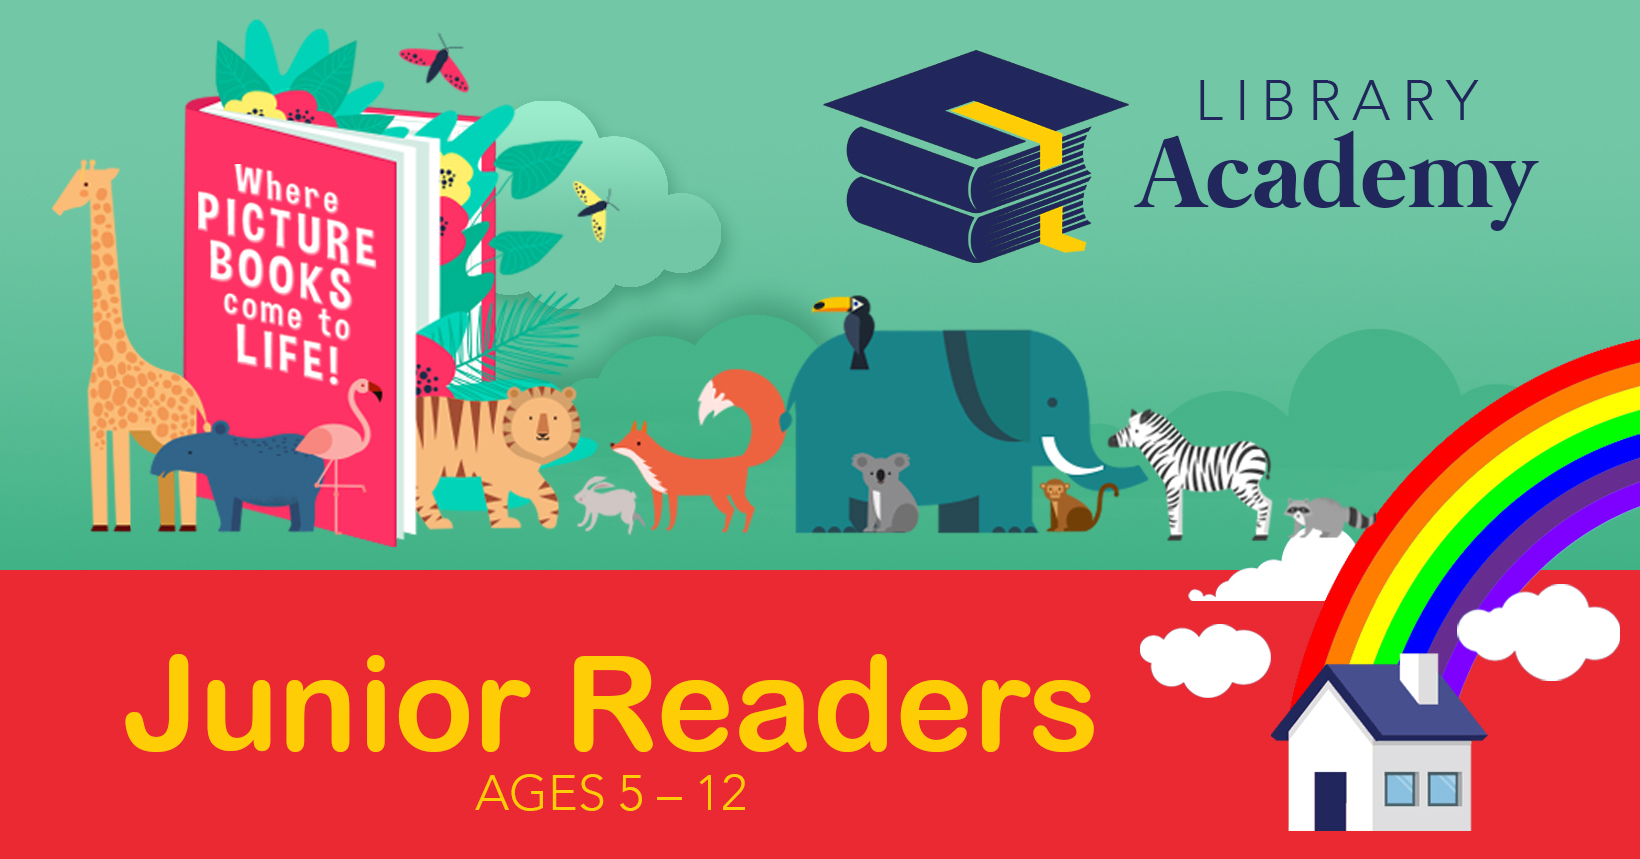 Library Academy - Junior Readers graphic with illustrated animals, where picture books come to life